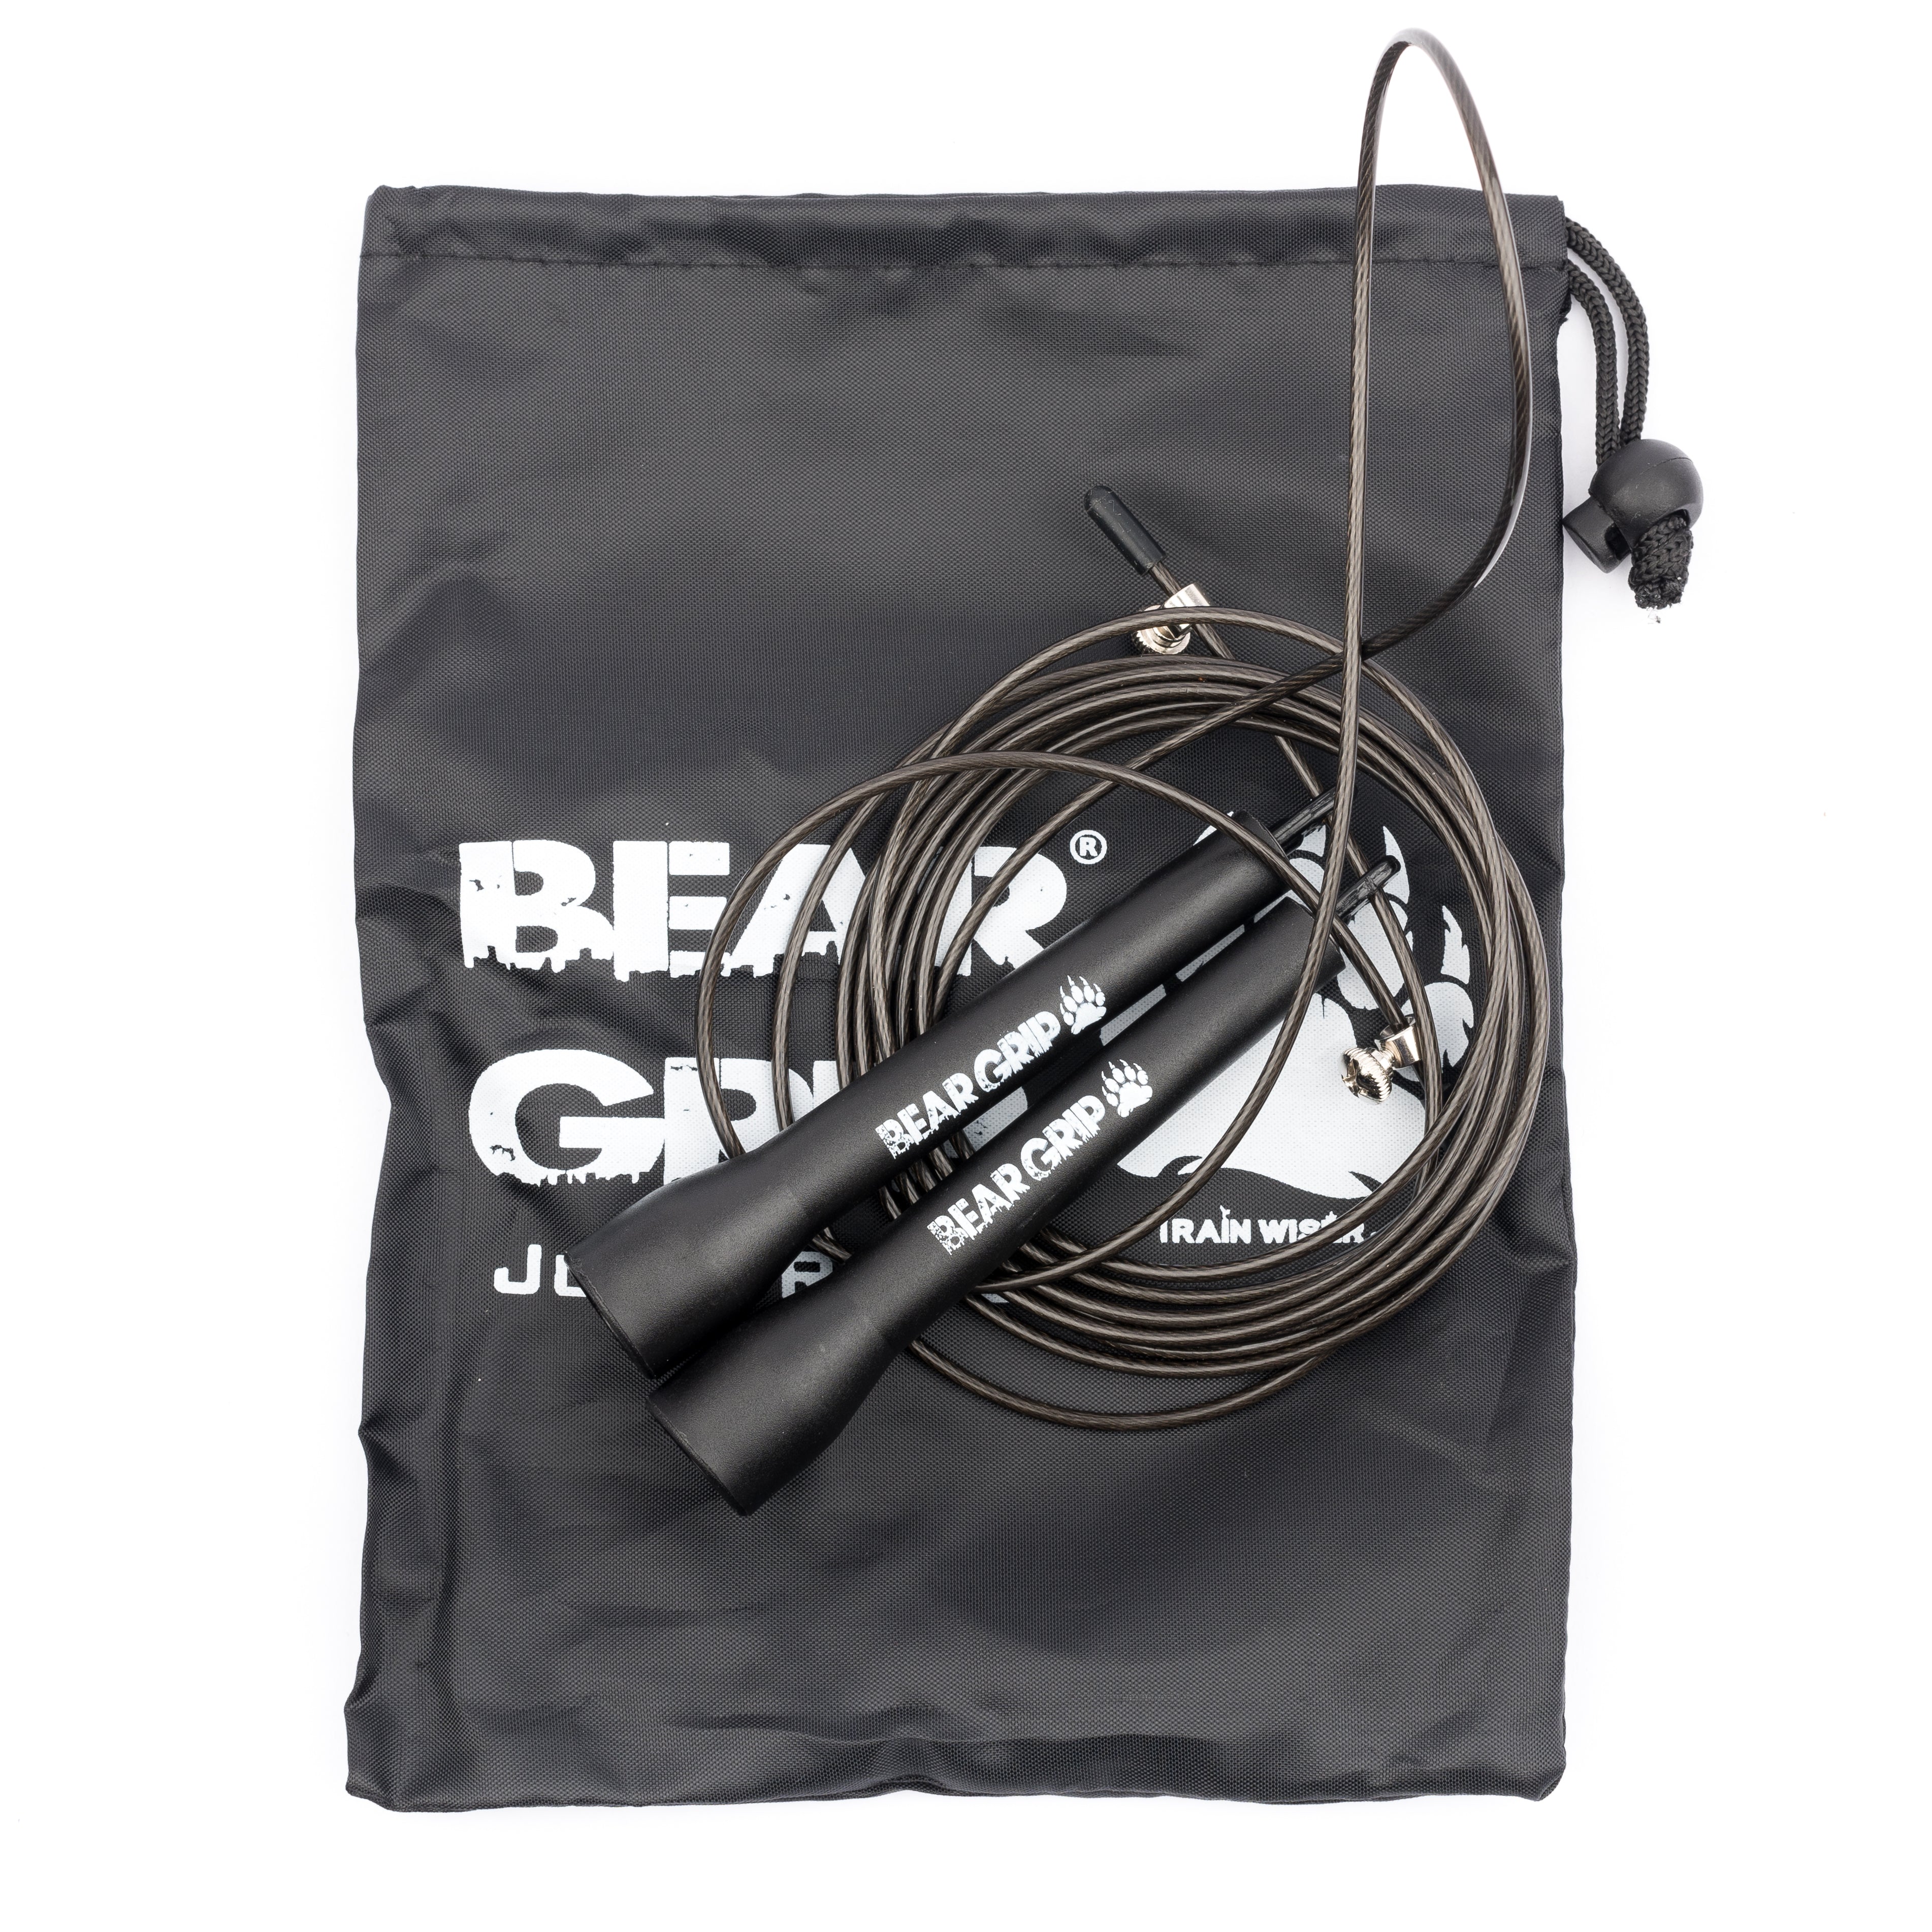 Bear Grip - Best Skipping Speed Jump Rope, Adjustable 10ft Cable, ( STEEL BALL-BEARING mechanism) For Cardio, Boxing, MMA, Crossfit with FREE GYM GEAR BAG - MONEY BACK GUARANTEE.